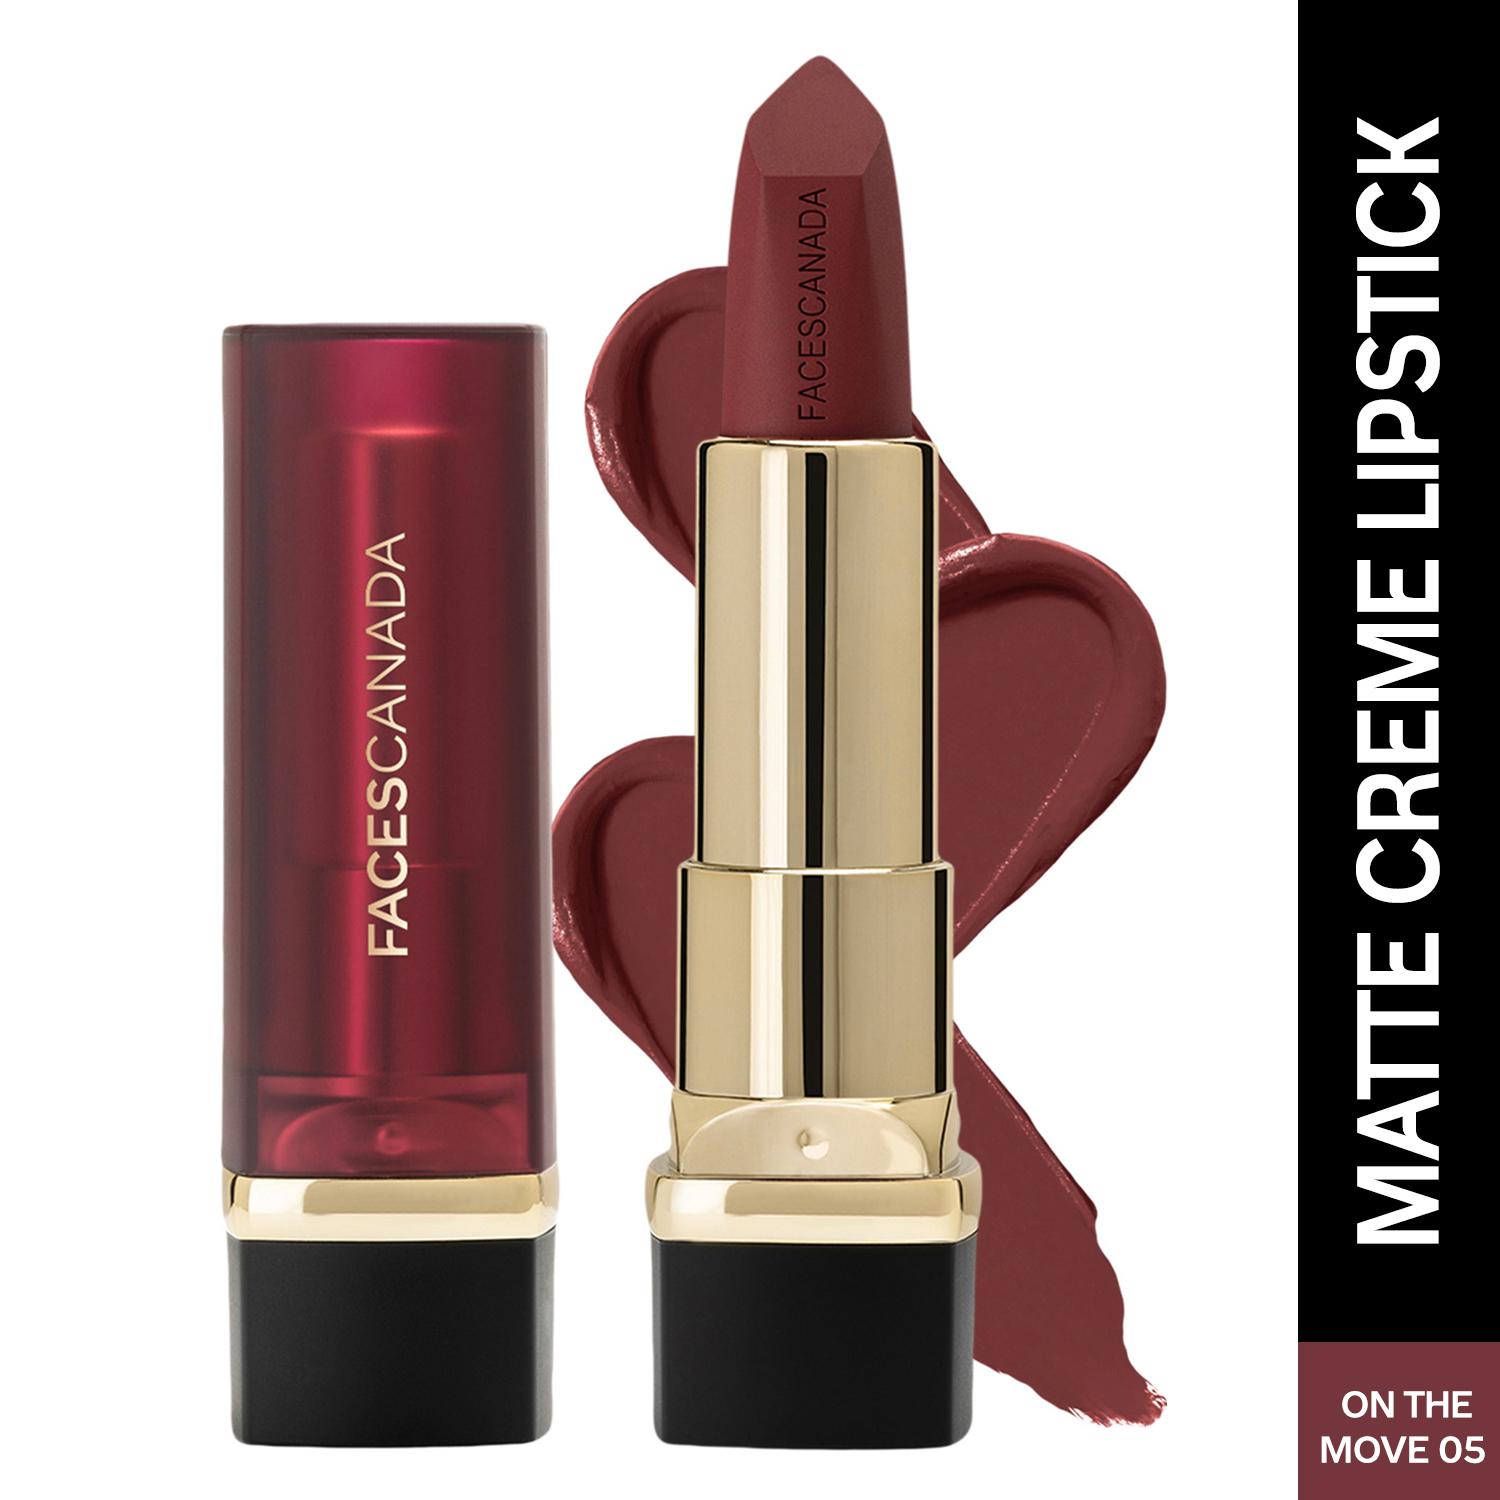 Faces Canada | Faces Canada Comfy Matte Crème Lipstick, 8HR Long Stay, Intense Color - On The Move 05 (4.2 g)